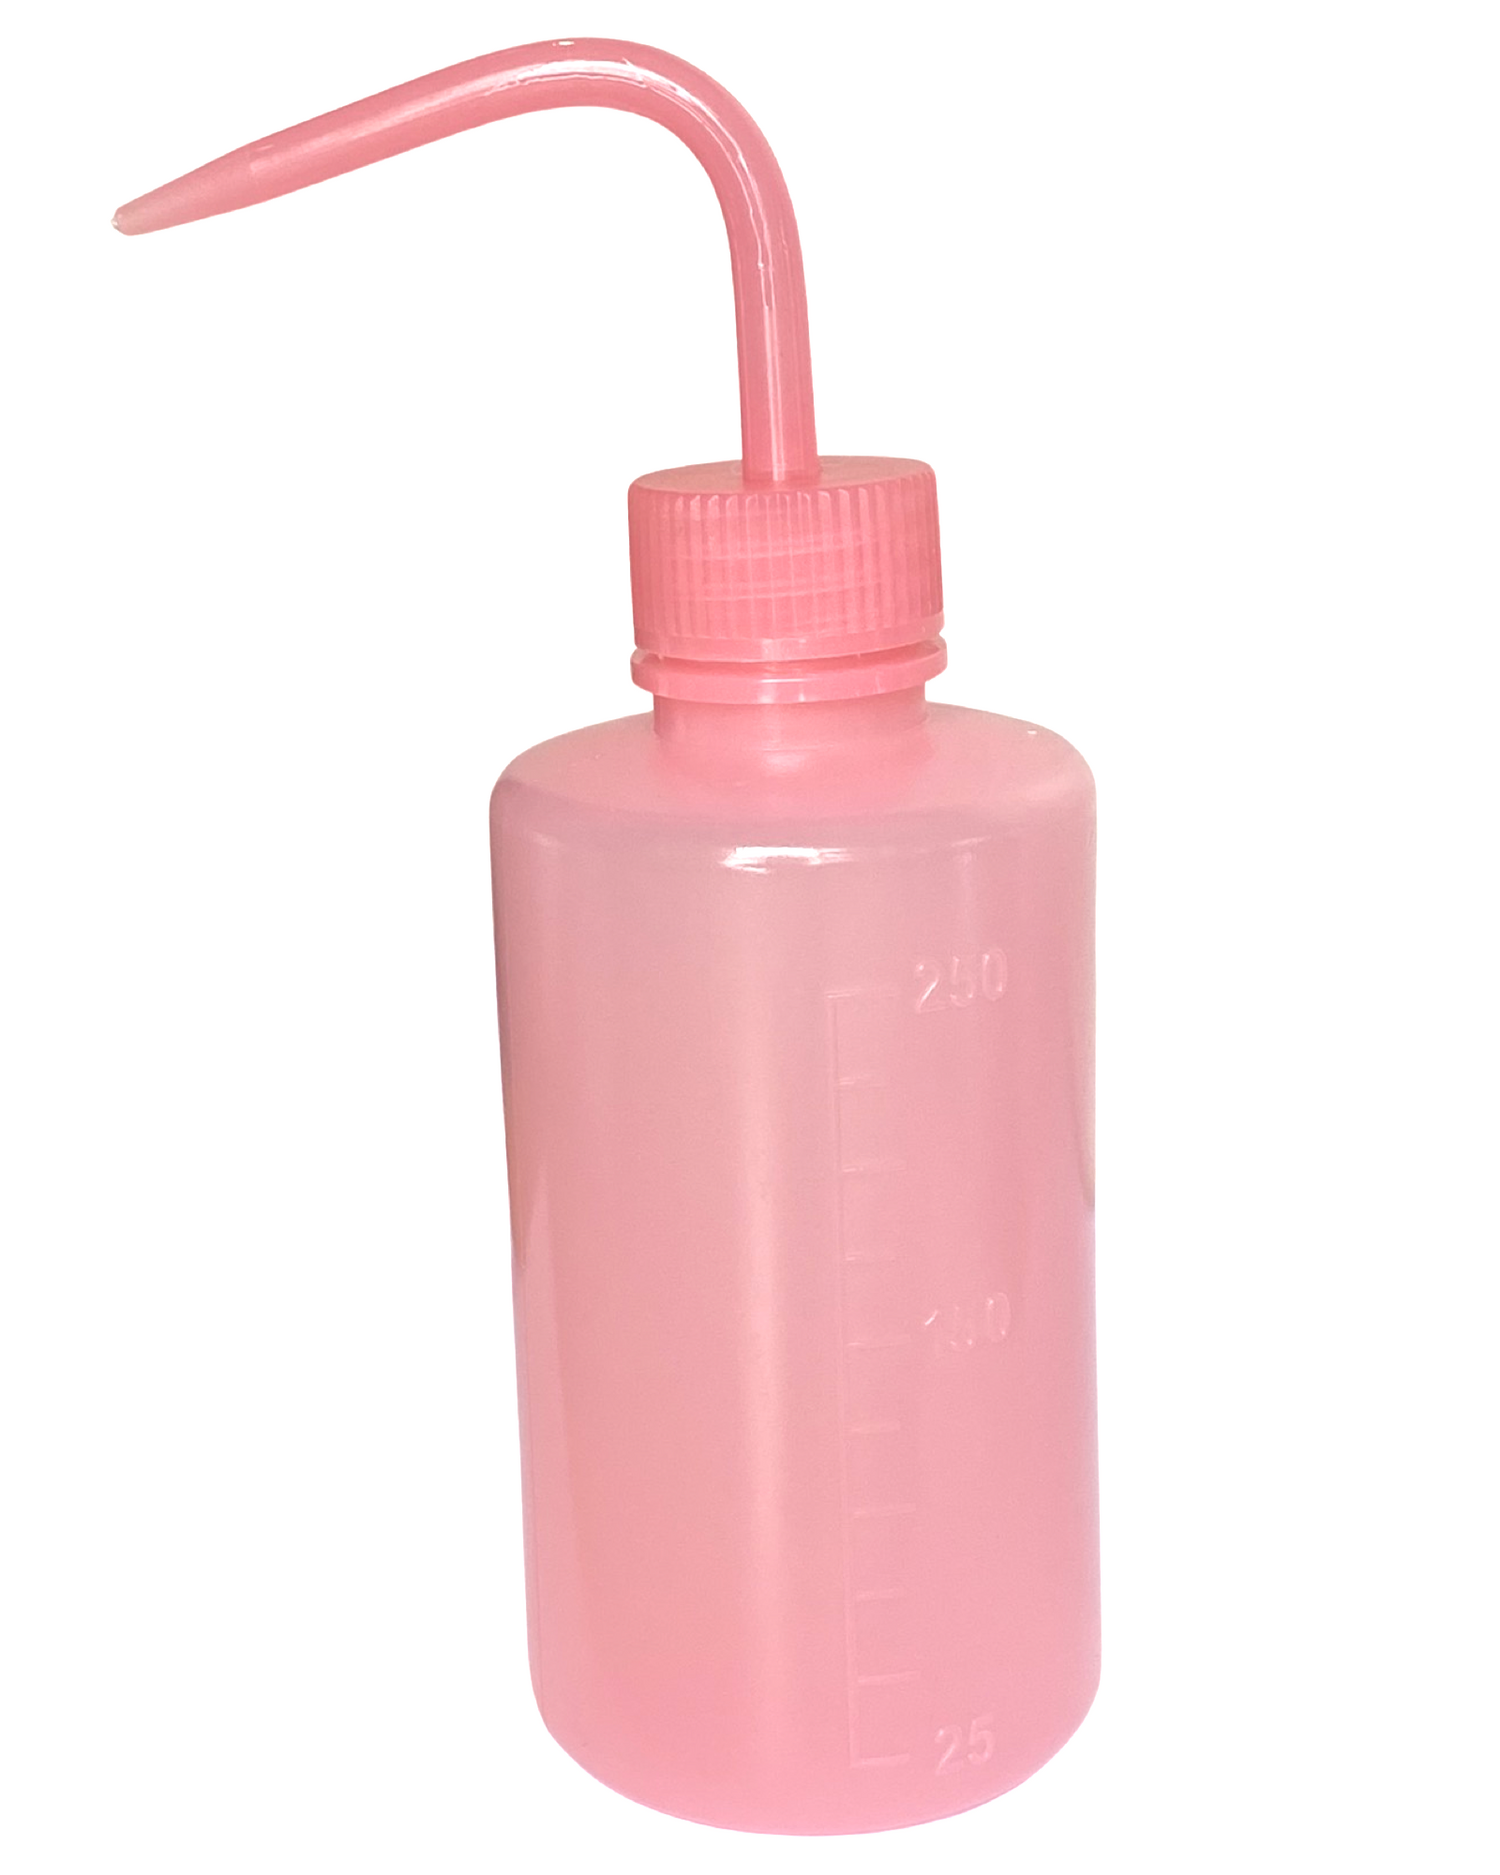 Pink wash bottle with spout